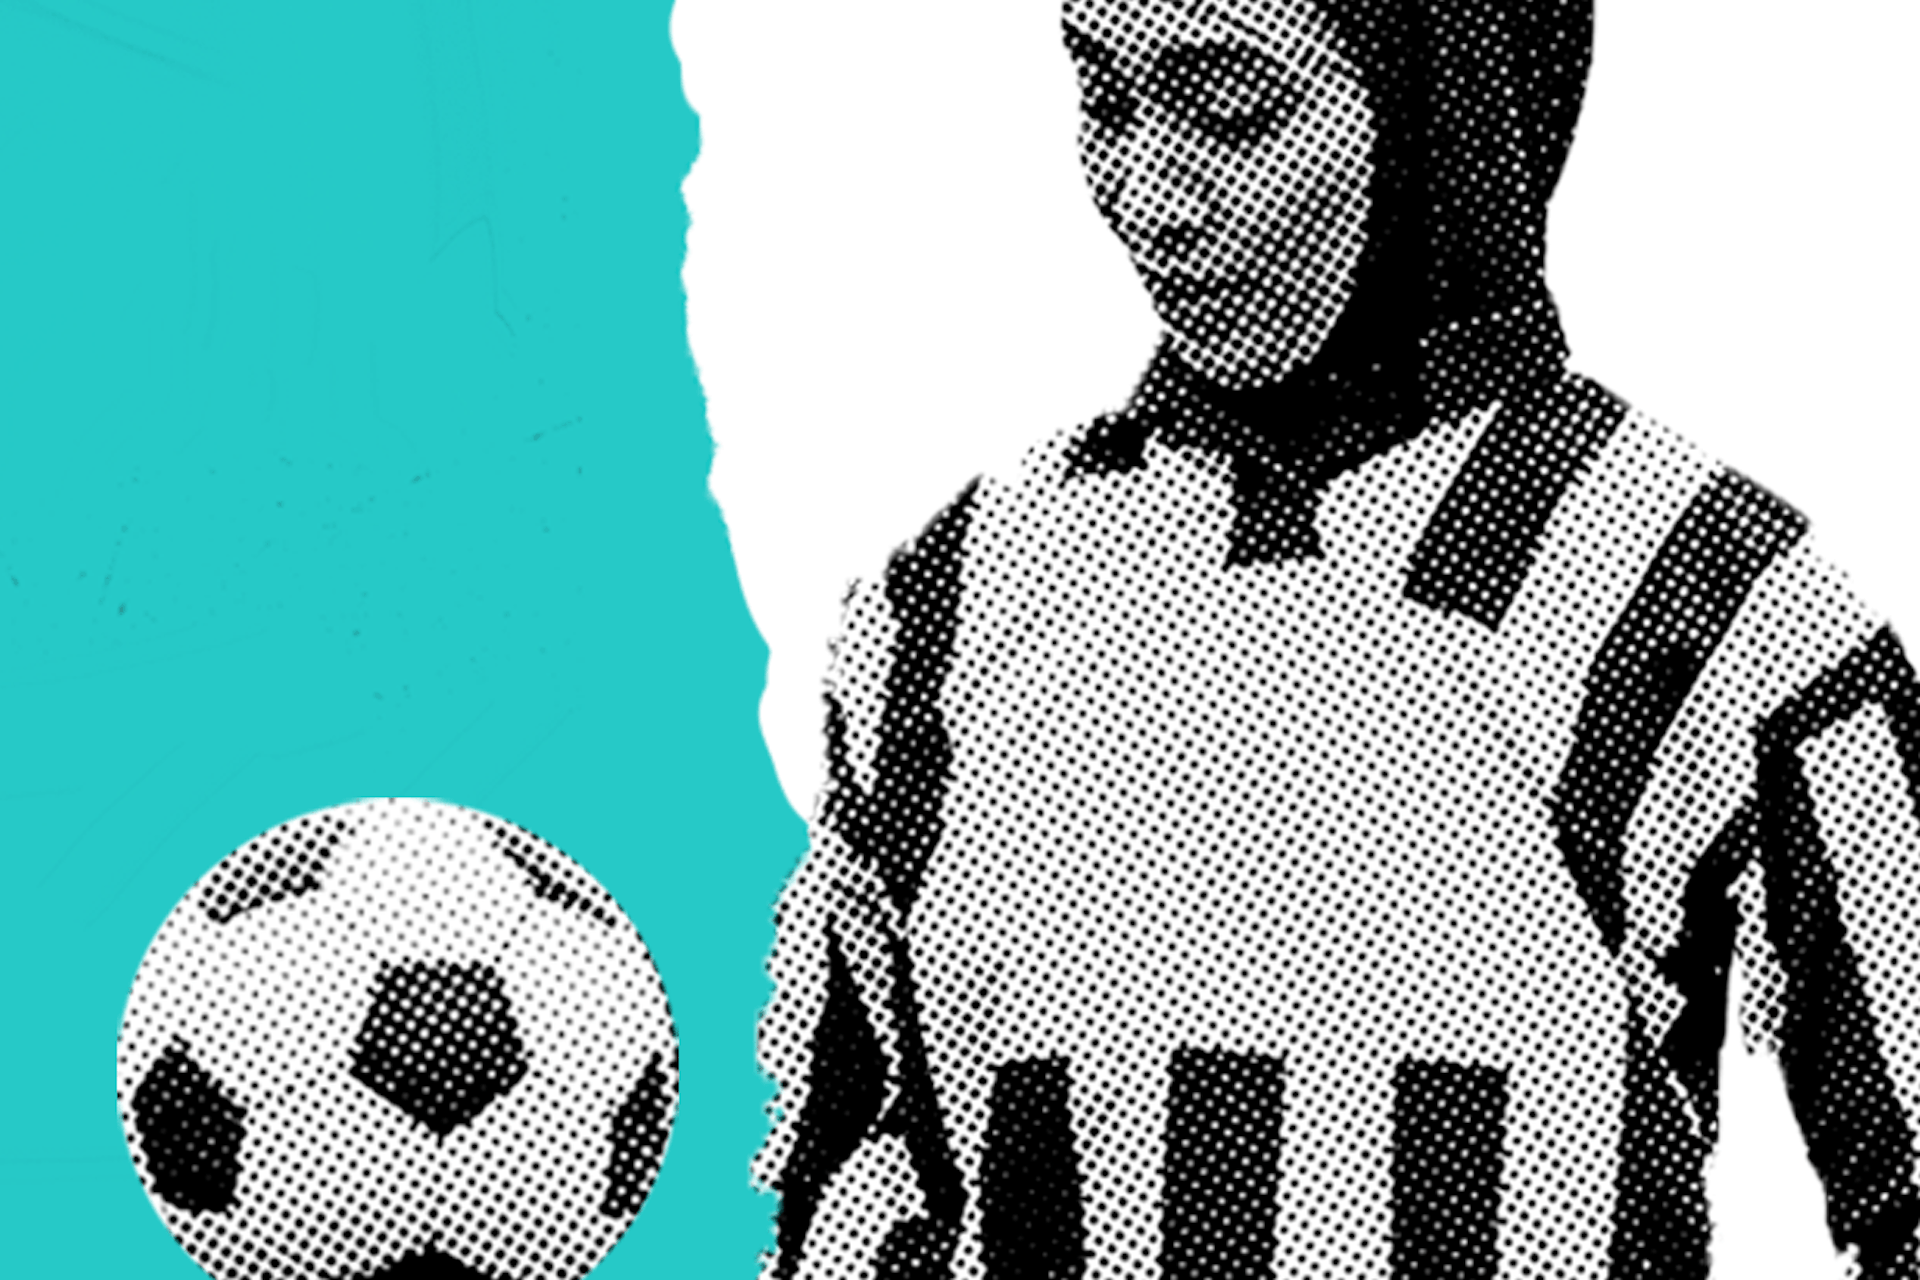 The image has a female soccer player bouncing a soccer ball off of her knee. This image is the cover of the "Birdseye Report: Industry Deep Dive on Sports" outlining the biggest social trends in sports.. 